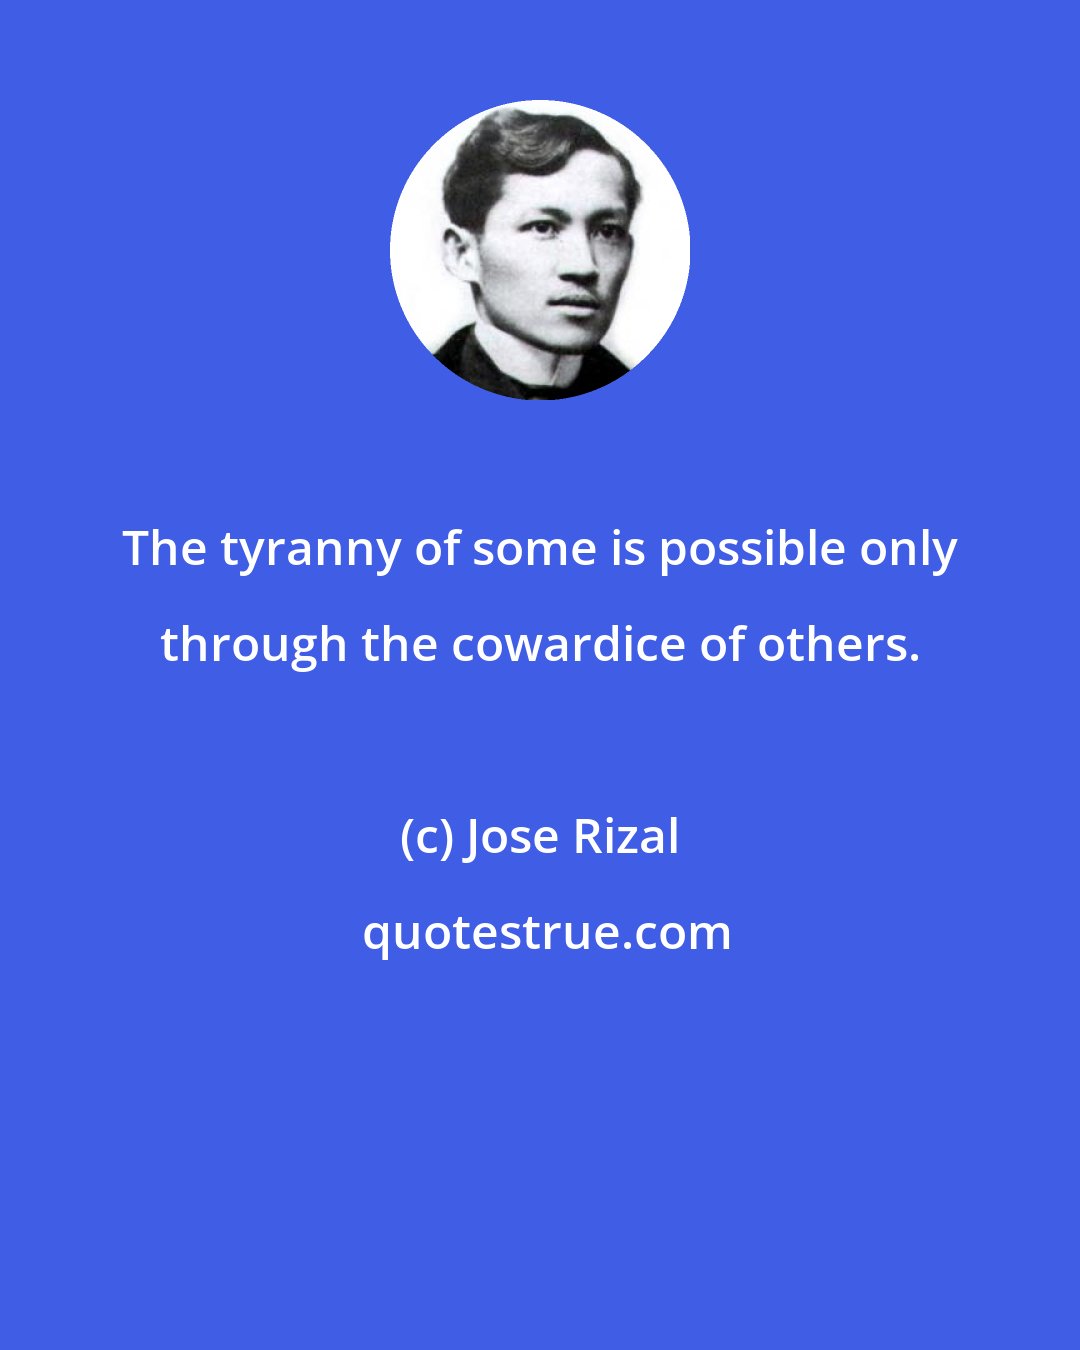 Jose Rizal: The tyranny of some is possible only through the cowardice of others.